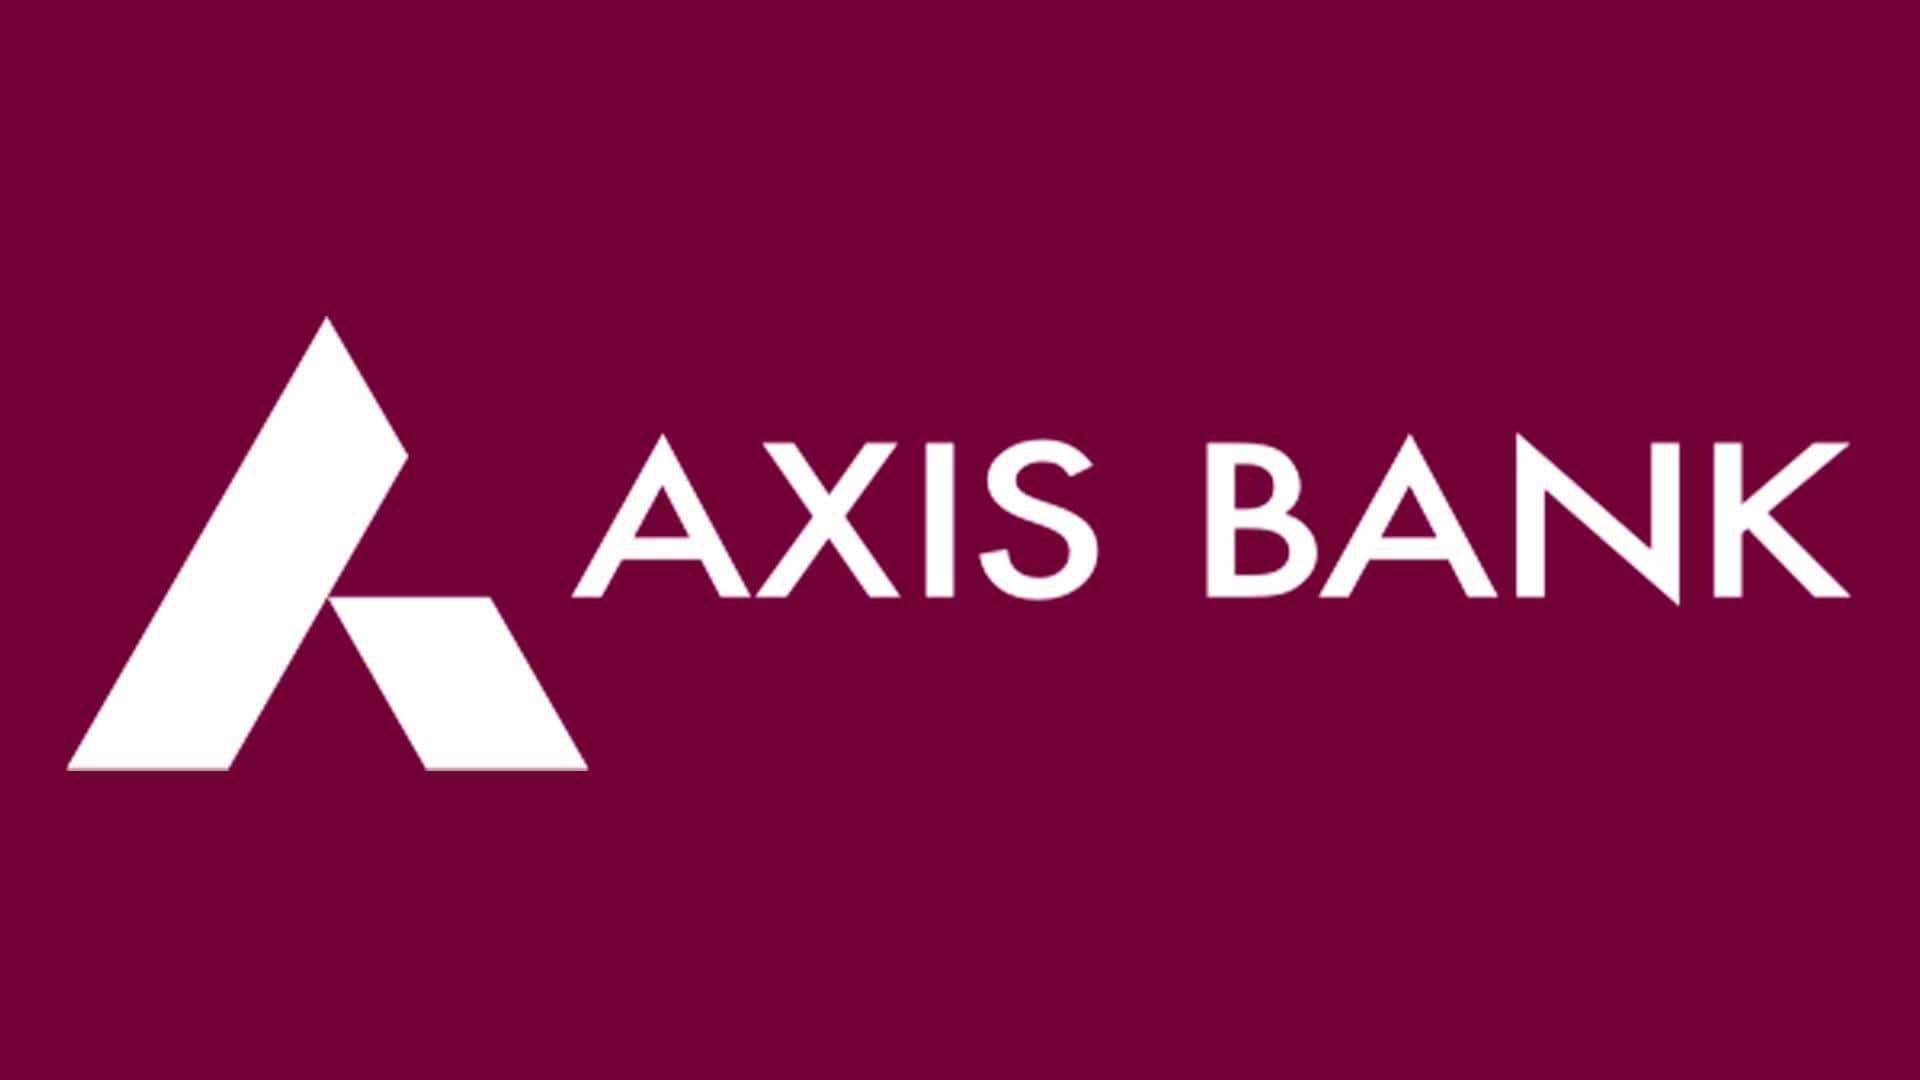 Axis Bank shares tumble amid allegations of Rs. 5,100cr scam